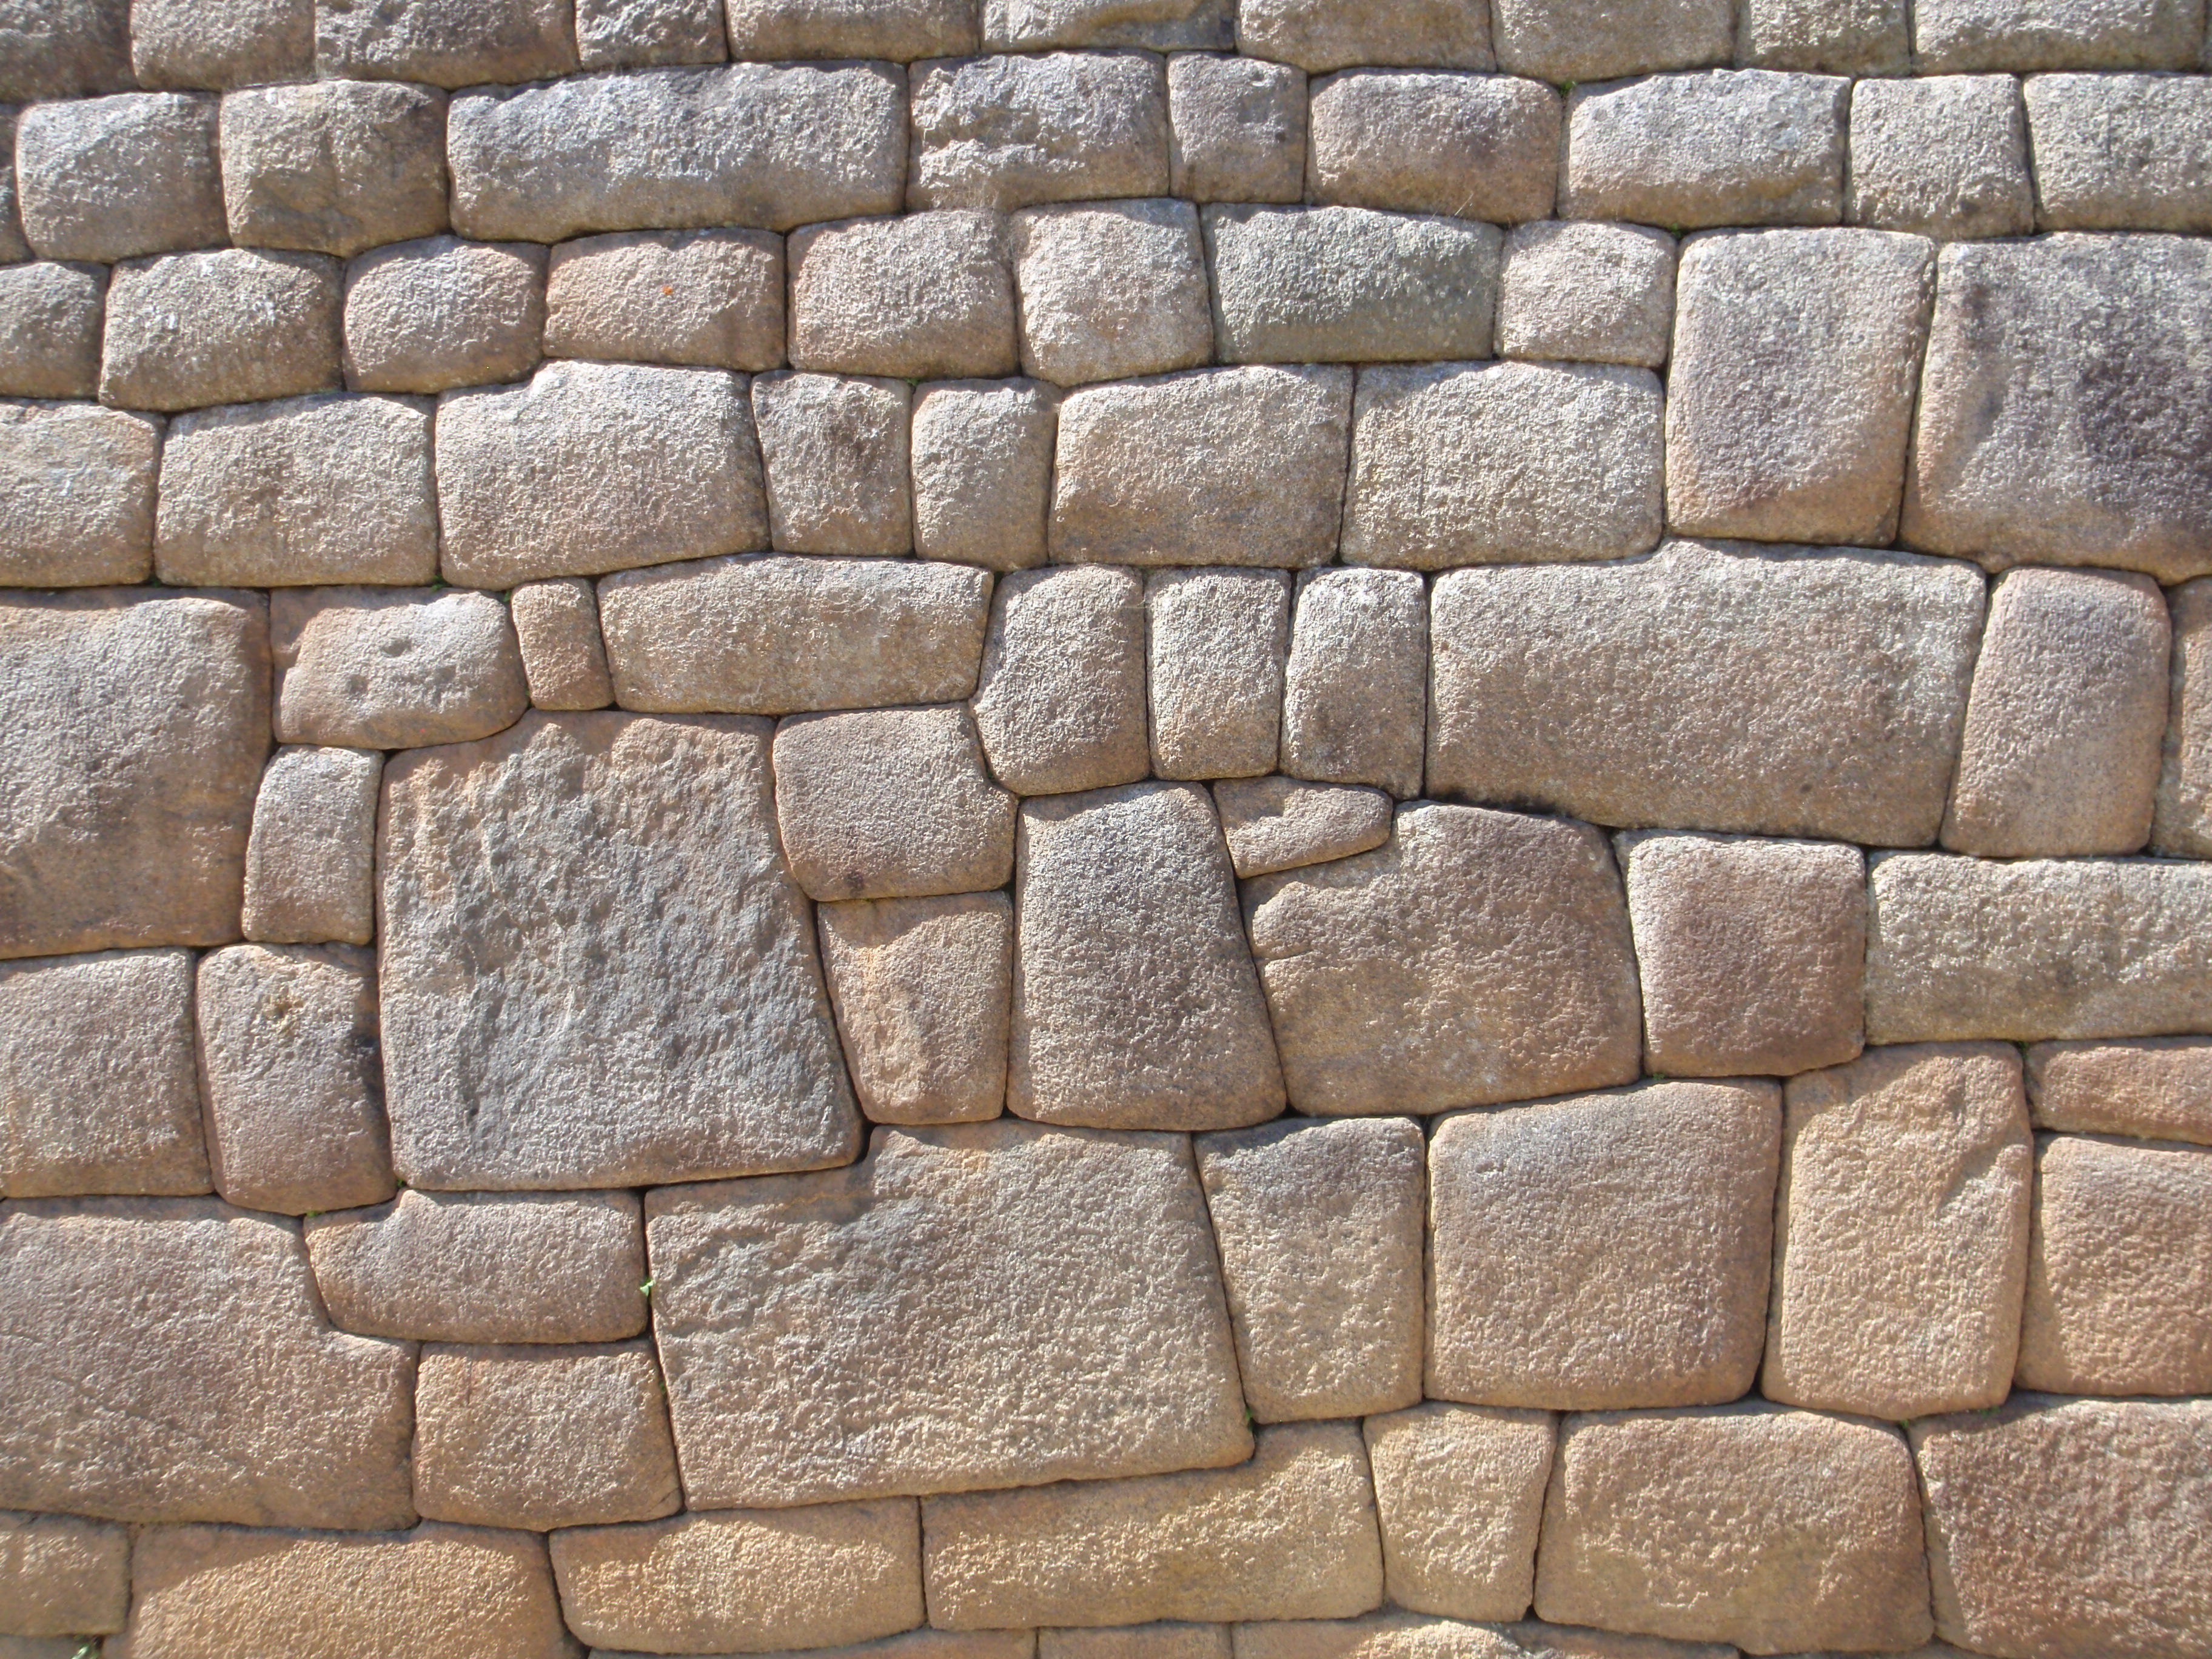 Detail image of stone masonry wall at Machu Picchu, Peru. Walls designed by the Incas were interlocked and are resistant to earthquakes due to the irregualr shapes and increased surface area of joints. Image search